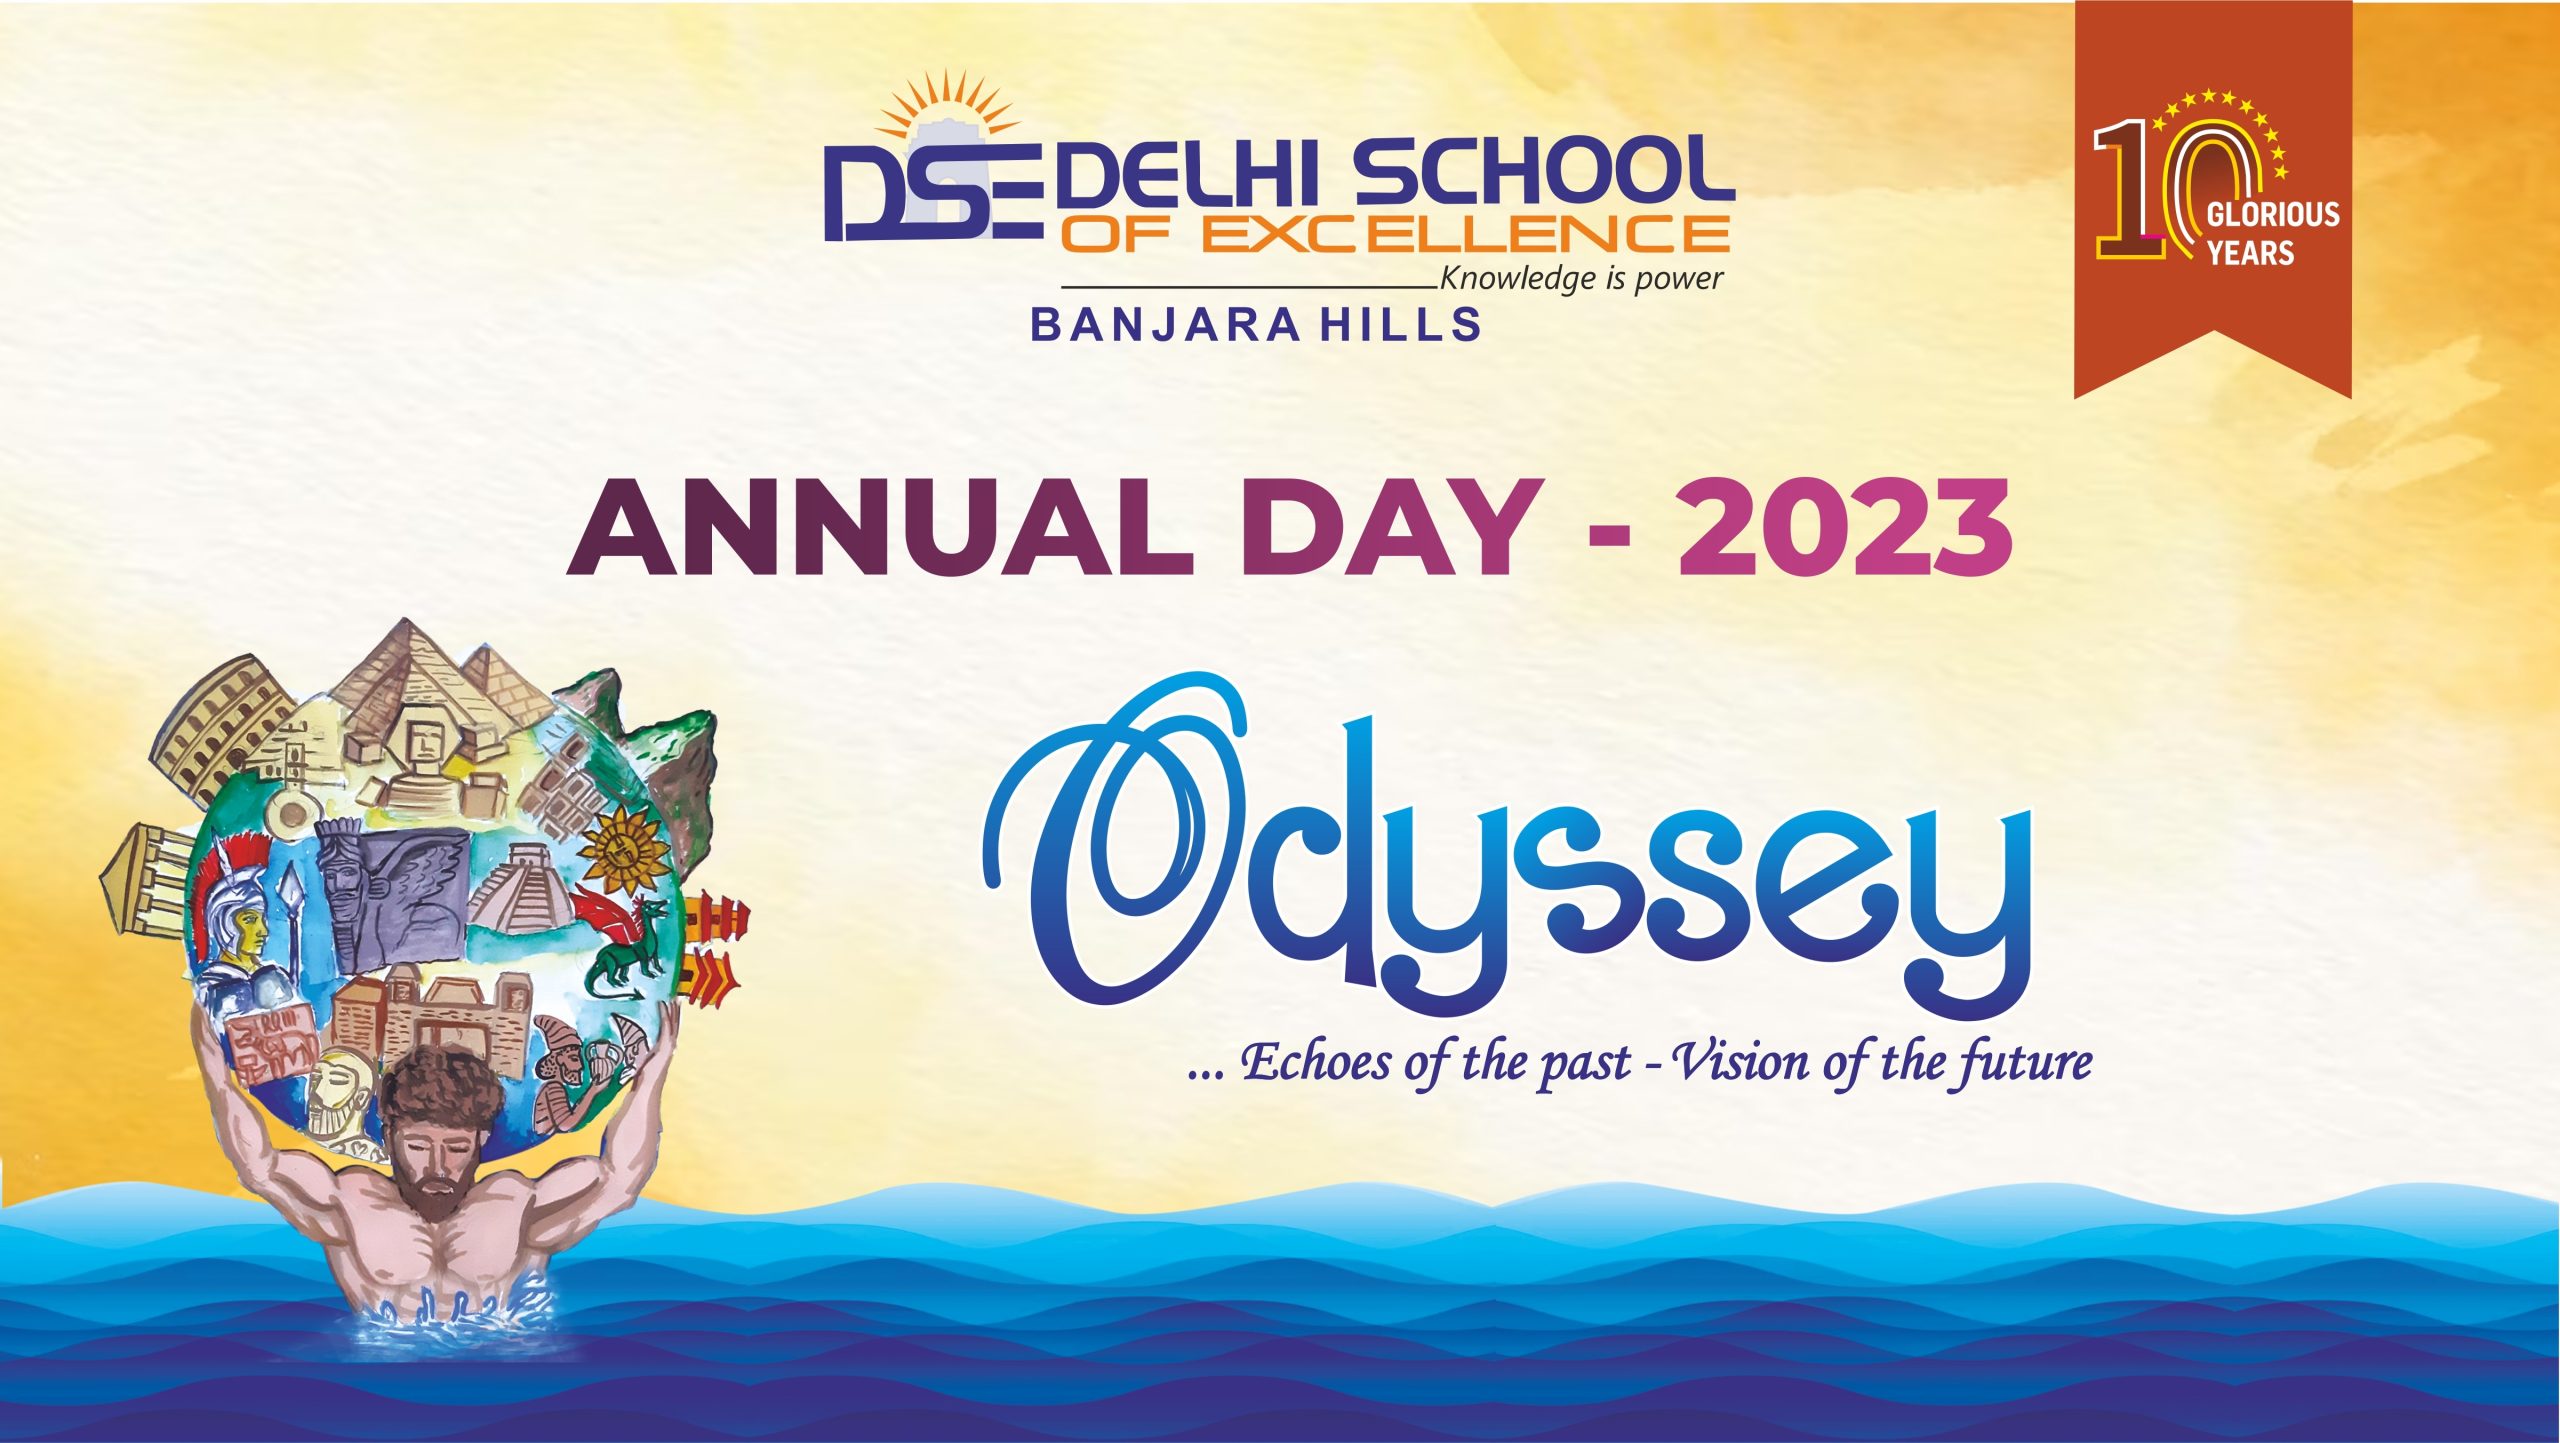 ODYSSEY – Echoes of the Past, Vision of the Future- Annual Day Celebrations